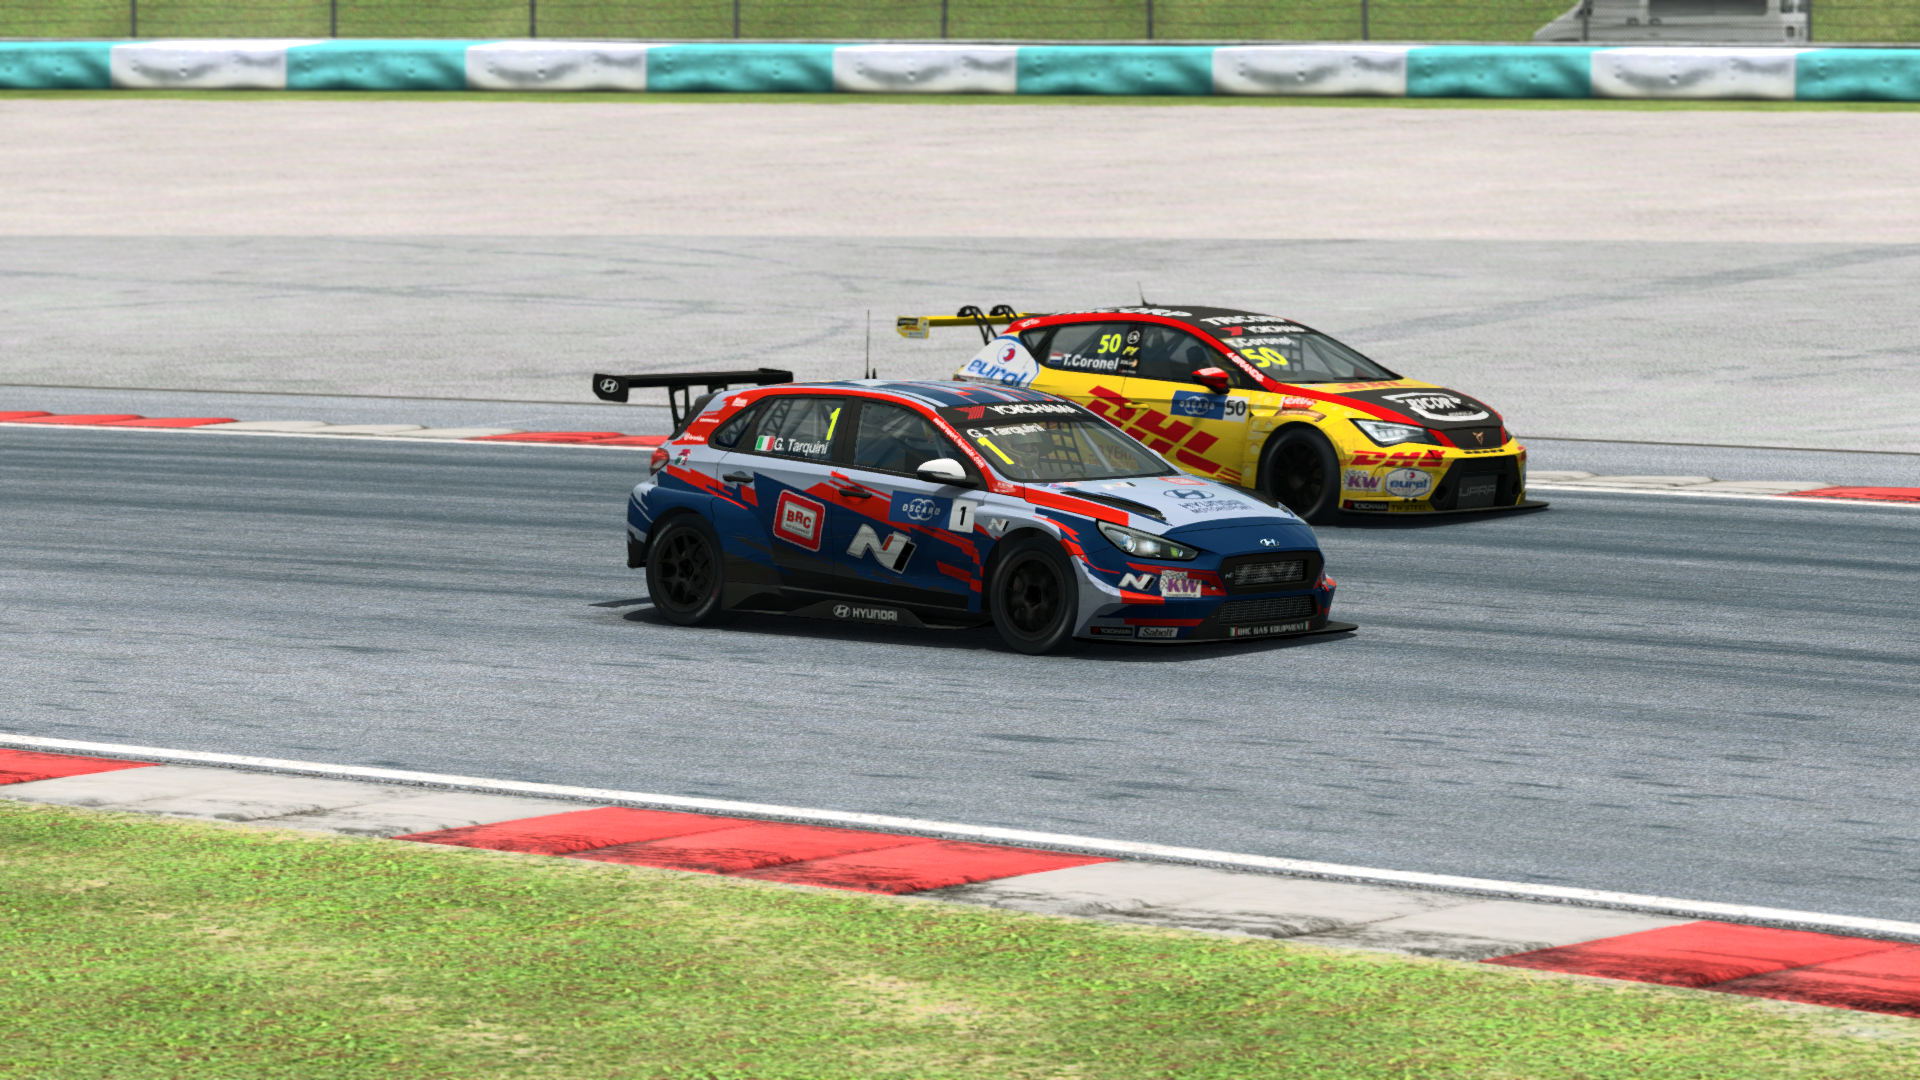 03-lohner-and-baldi-battle-in-esports-wtcr_2.png